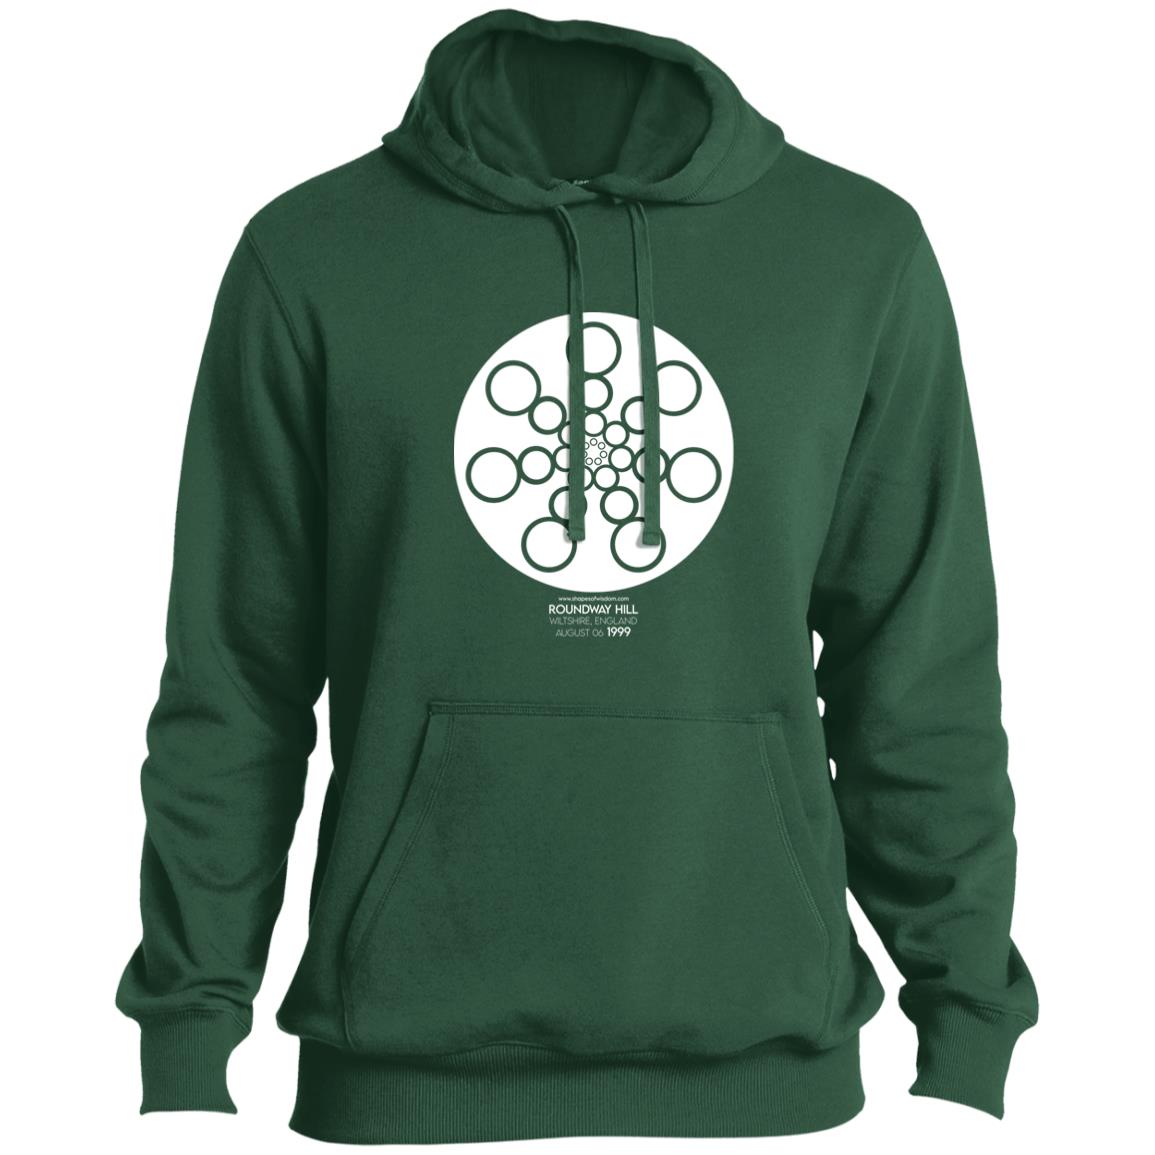 Crop Circle Pullover Hoodie - Roundway Hill 4